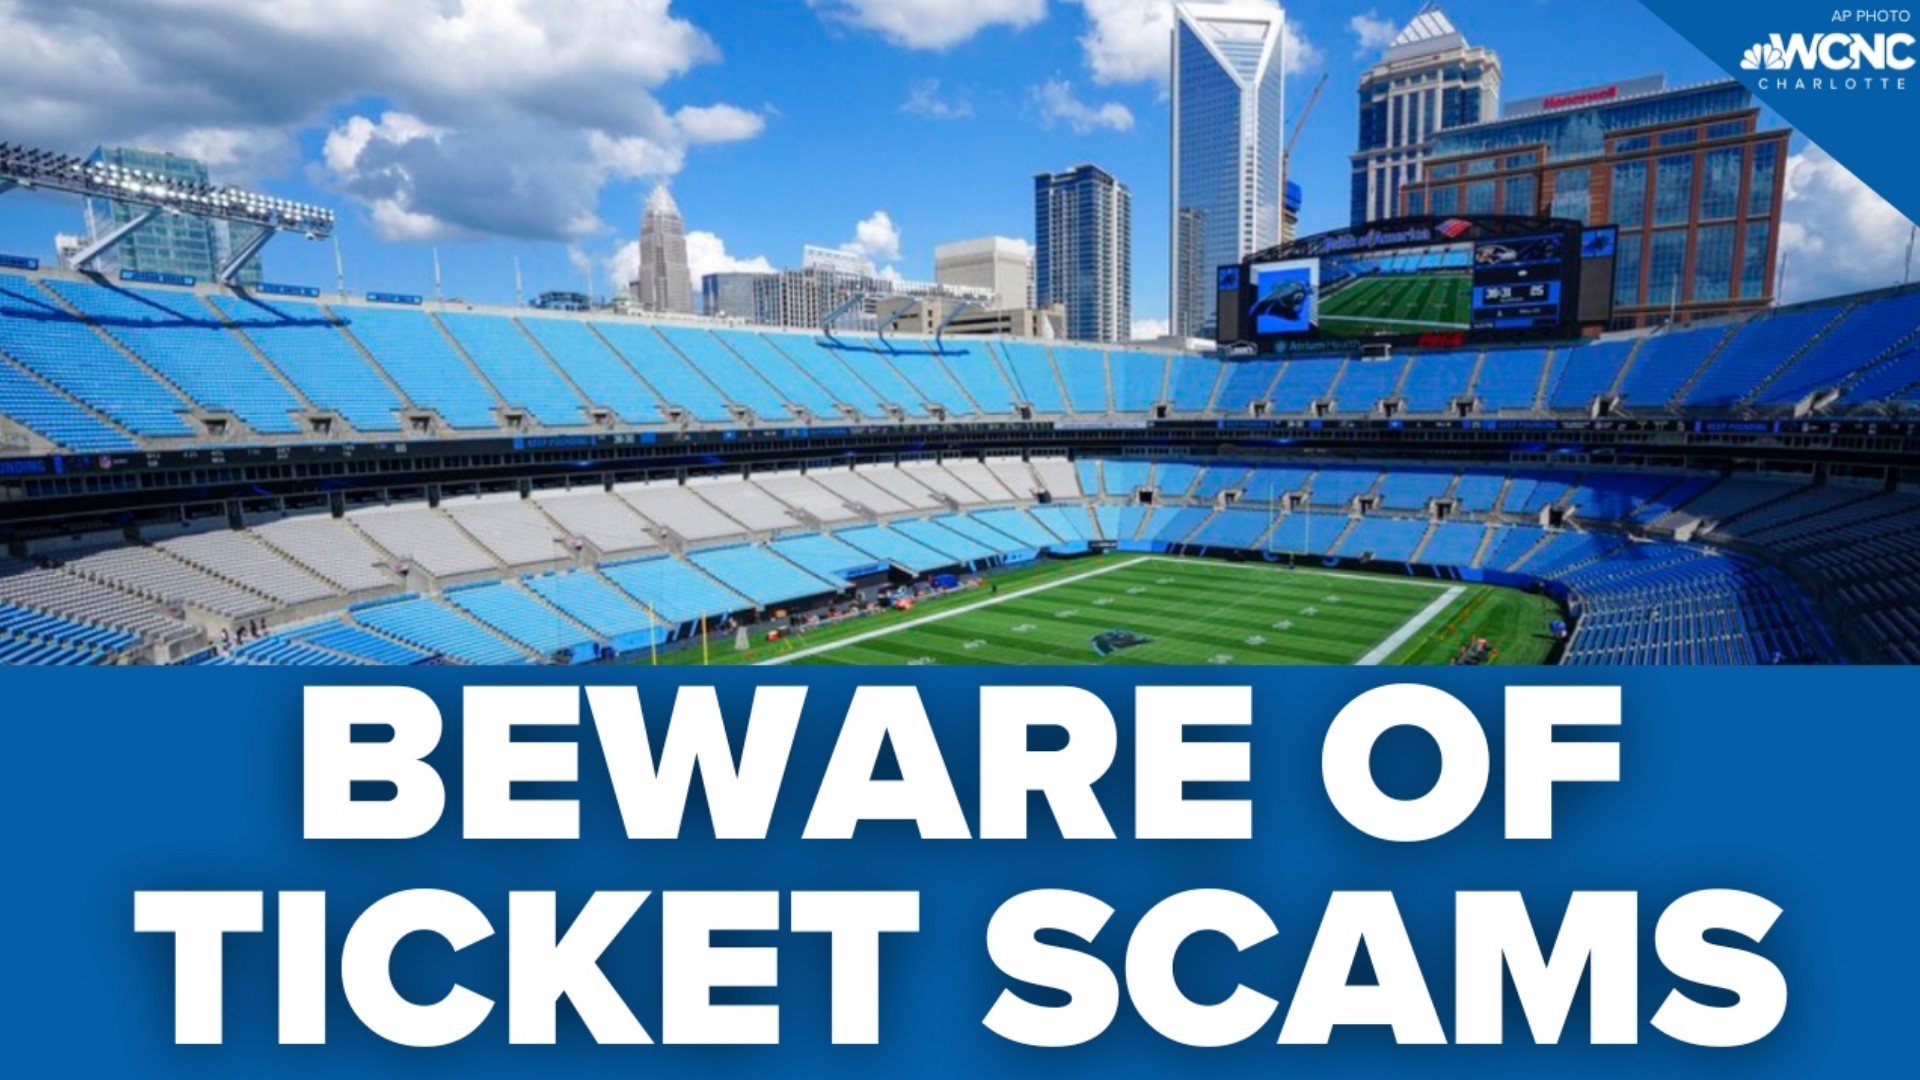 cleveland browns vs panthers tickets